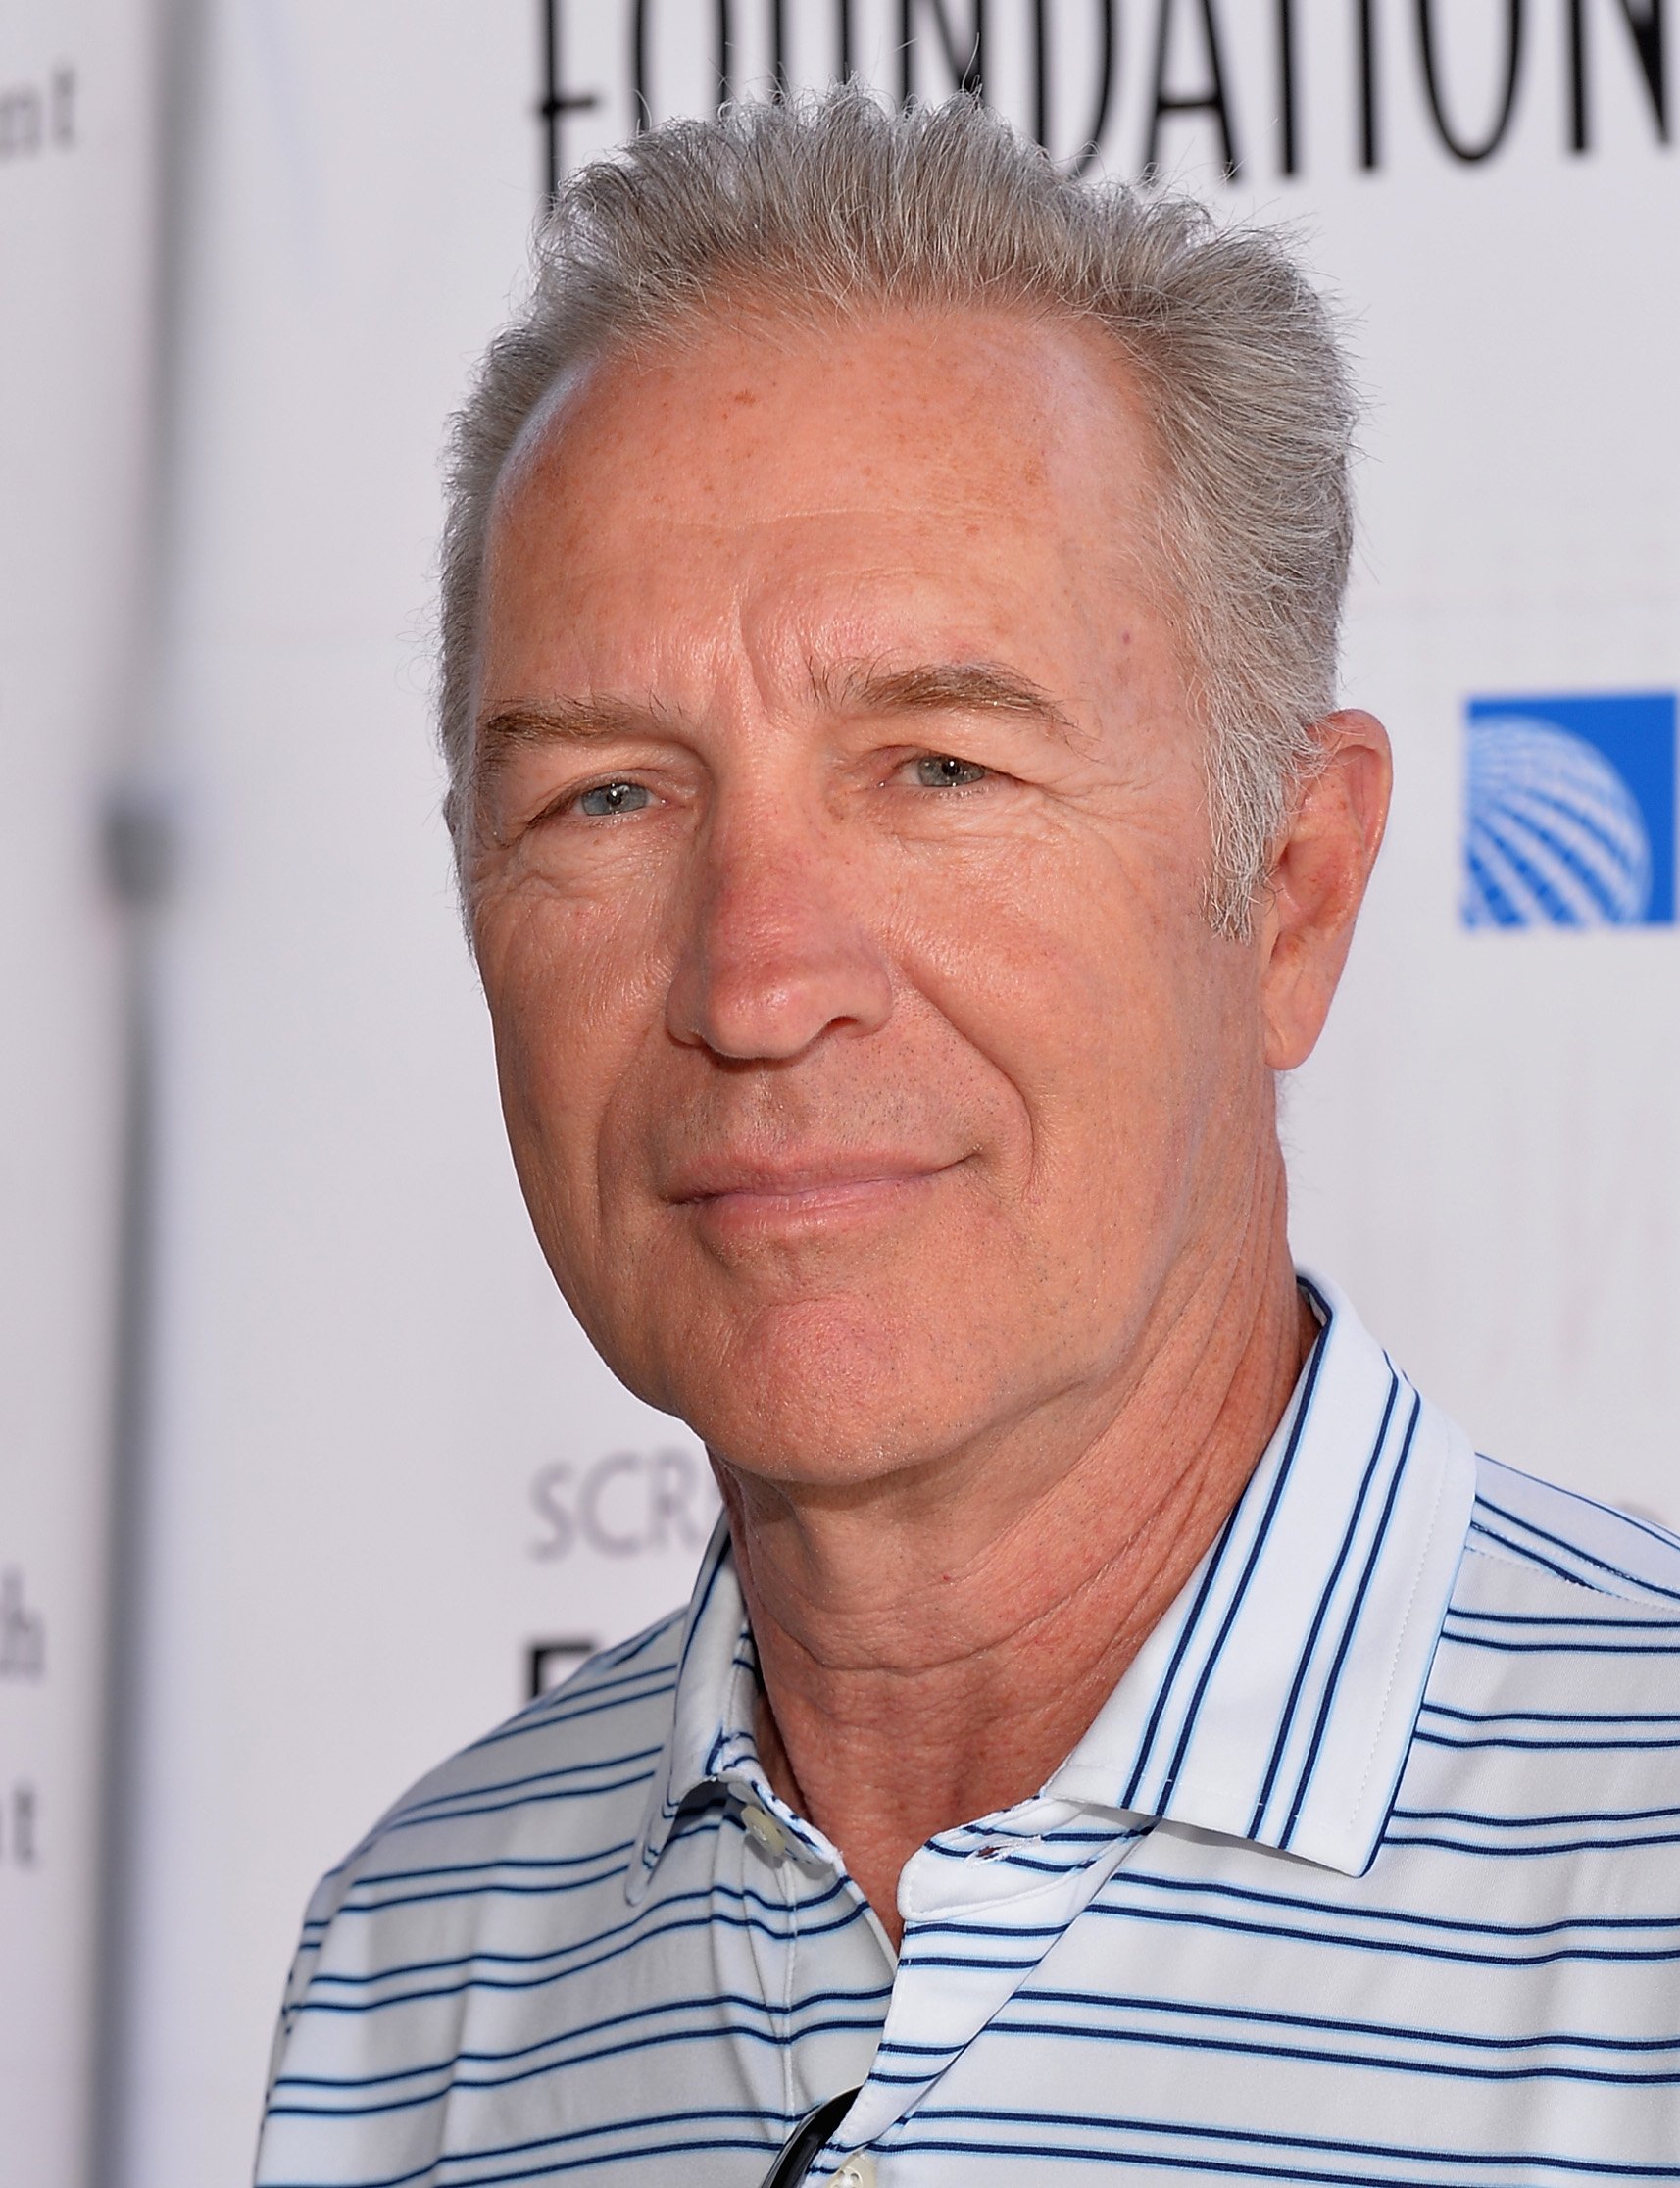 Jeff Pierson attends the Screen Actor's Guild Foundation's 5th Annual "Actors Fore Actors" Los Angeles Golf Classic at Lakeside Golf Club on June 9, 2014, in Burbank, California. | Source: Getty Images.